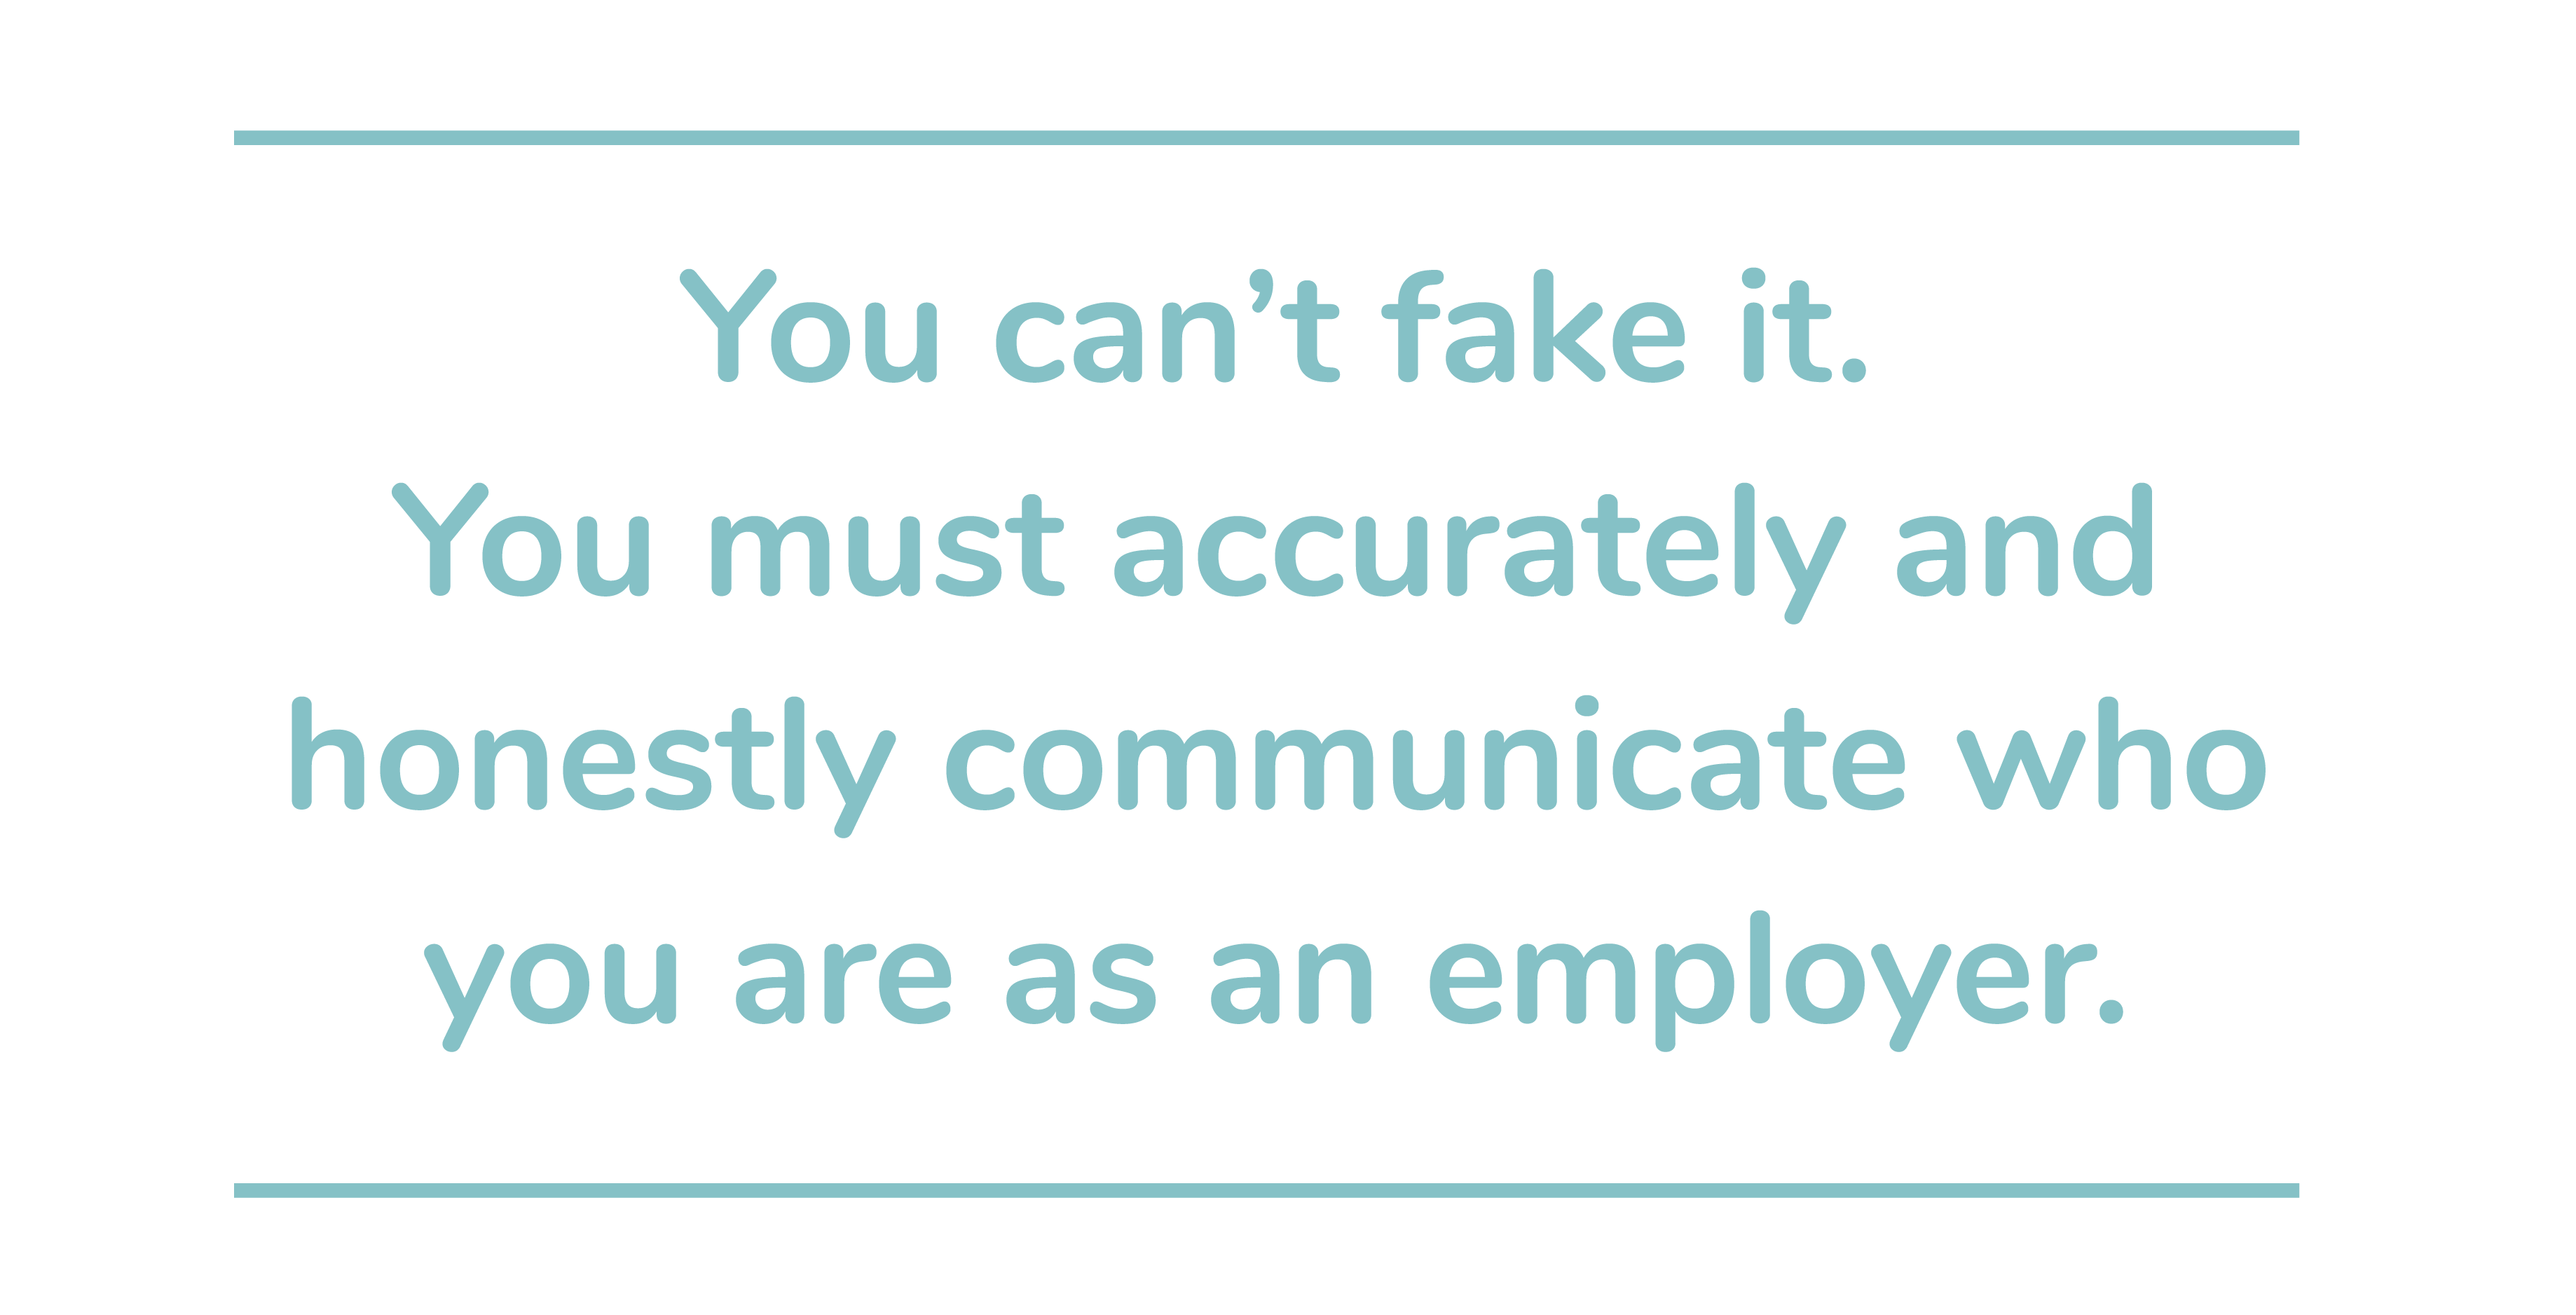 You can't fake it. You must accurately and honestly communicate who you are as an employer.